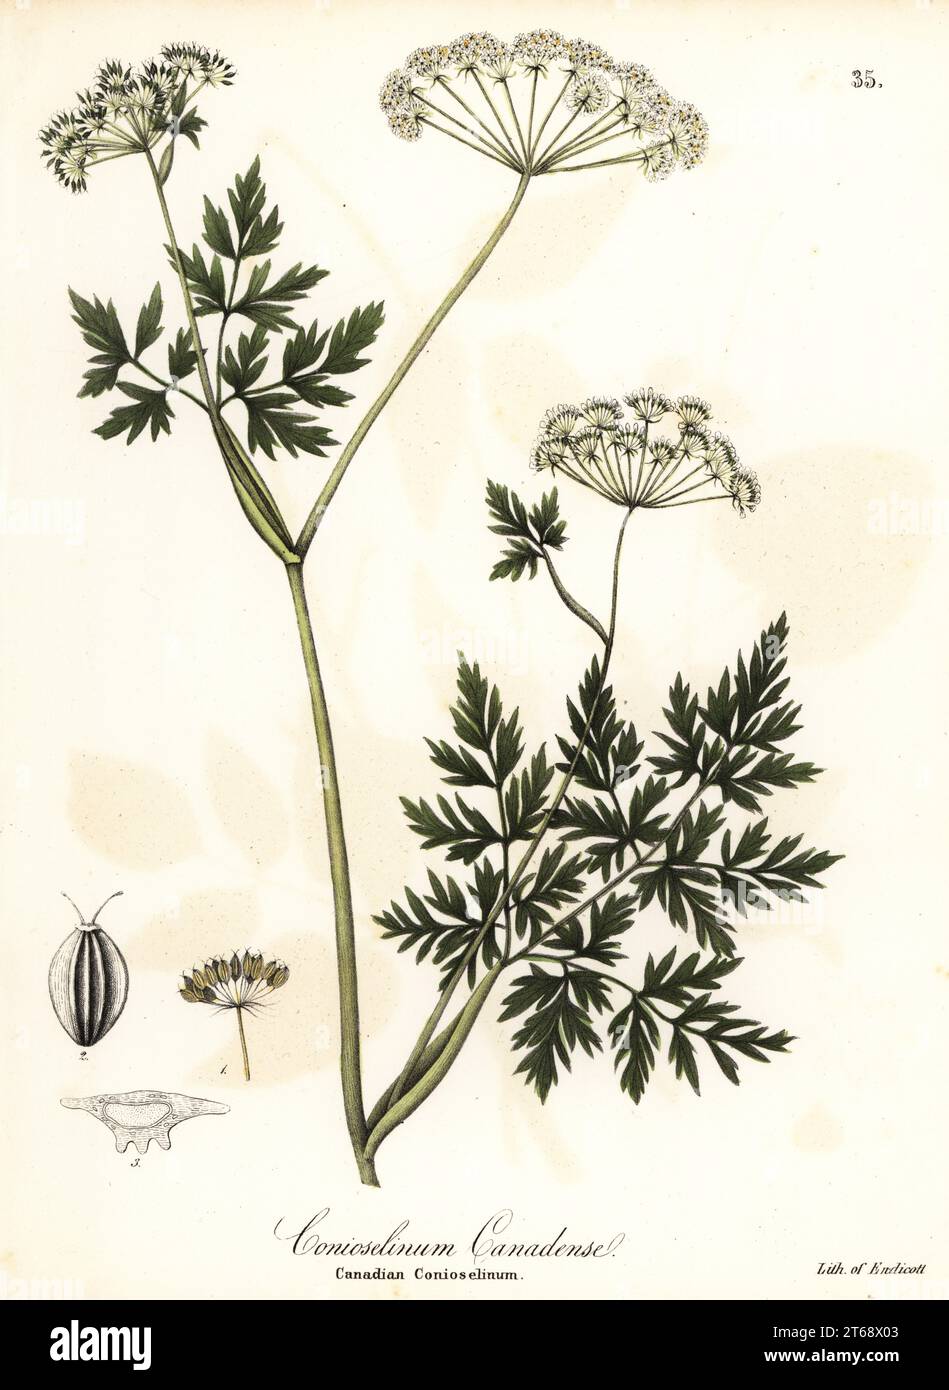 Hemlock-parsley., Conioselinum chinense (Canadian conioselinum, Conioselinum canadense). Handcoloured lithograph by Endicott after a botanical illustration from John Torreys A Flora of the State of New York, Carroll and Cook, Albany, 1843. The plates drawn by John Torrey, Agnes Mitchell, Elizabeth Paoley and Swinton. John Torrey was an American botanist, chemist and physician 1796-1873. Stock Photo